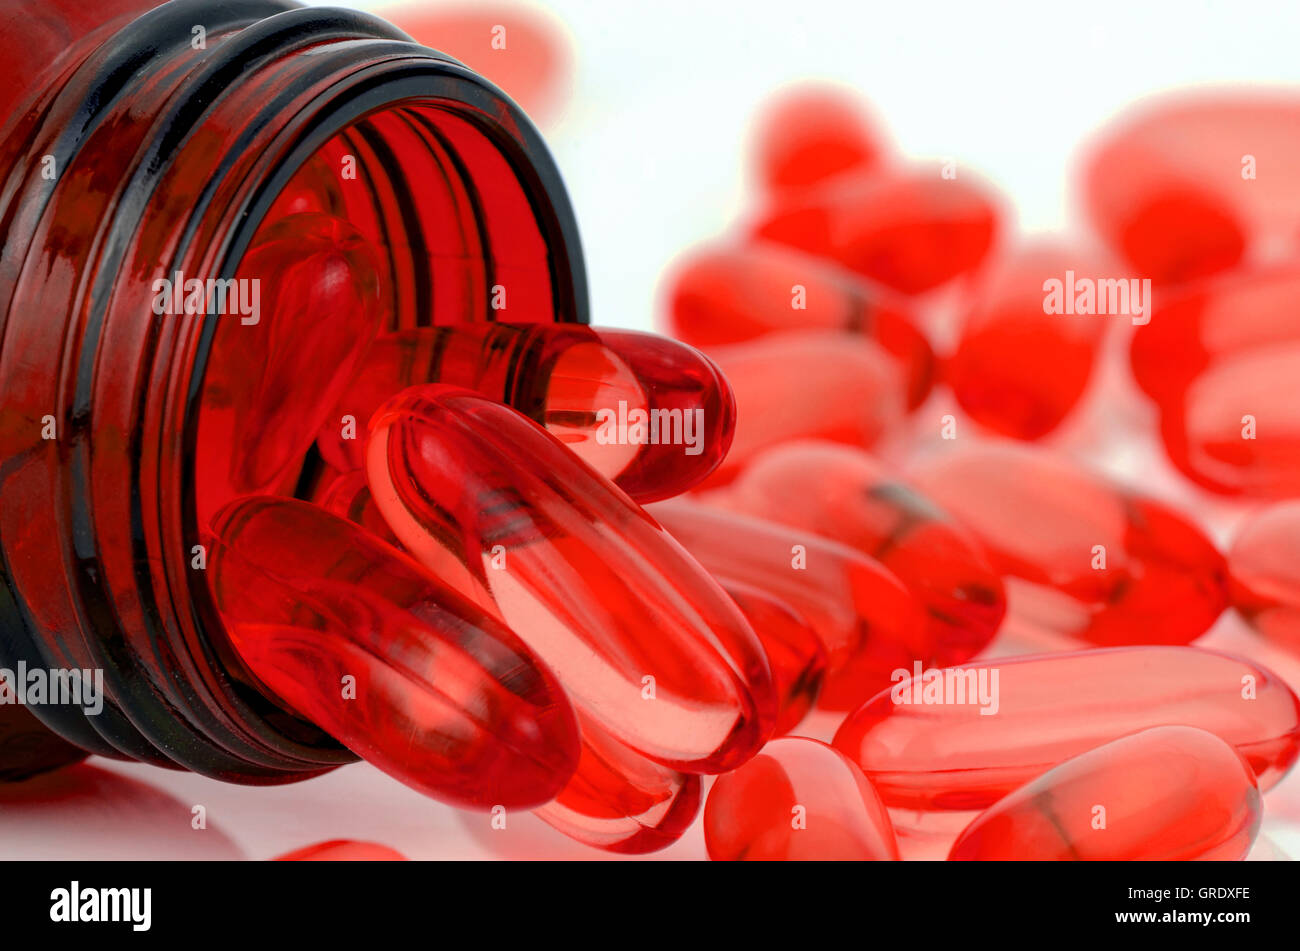 Red Soft Gelatin Capsule Use In Pharmaceutical Manufacturing